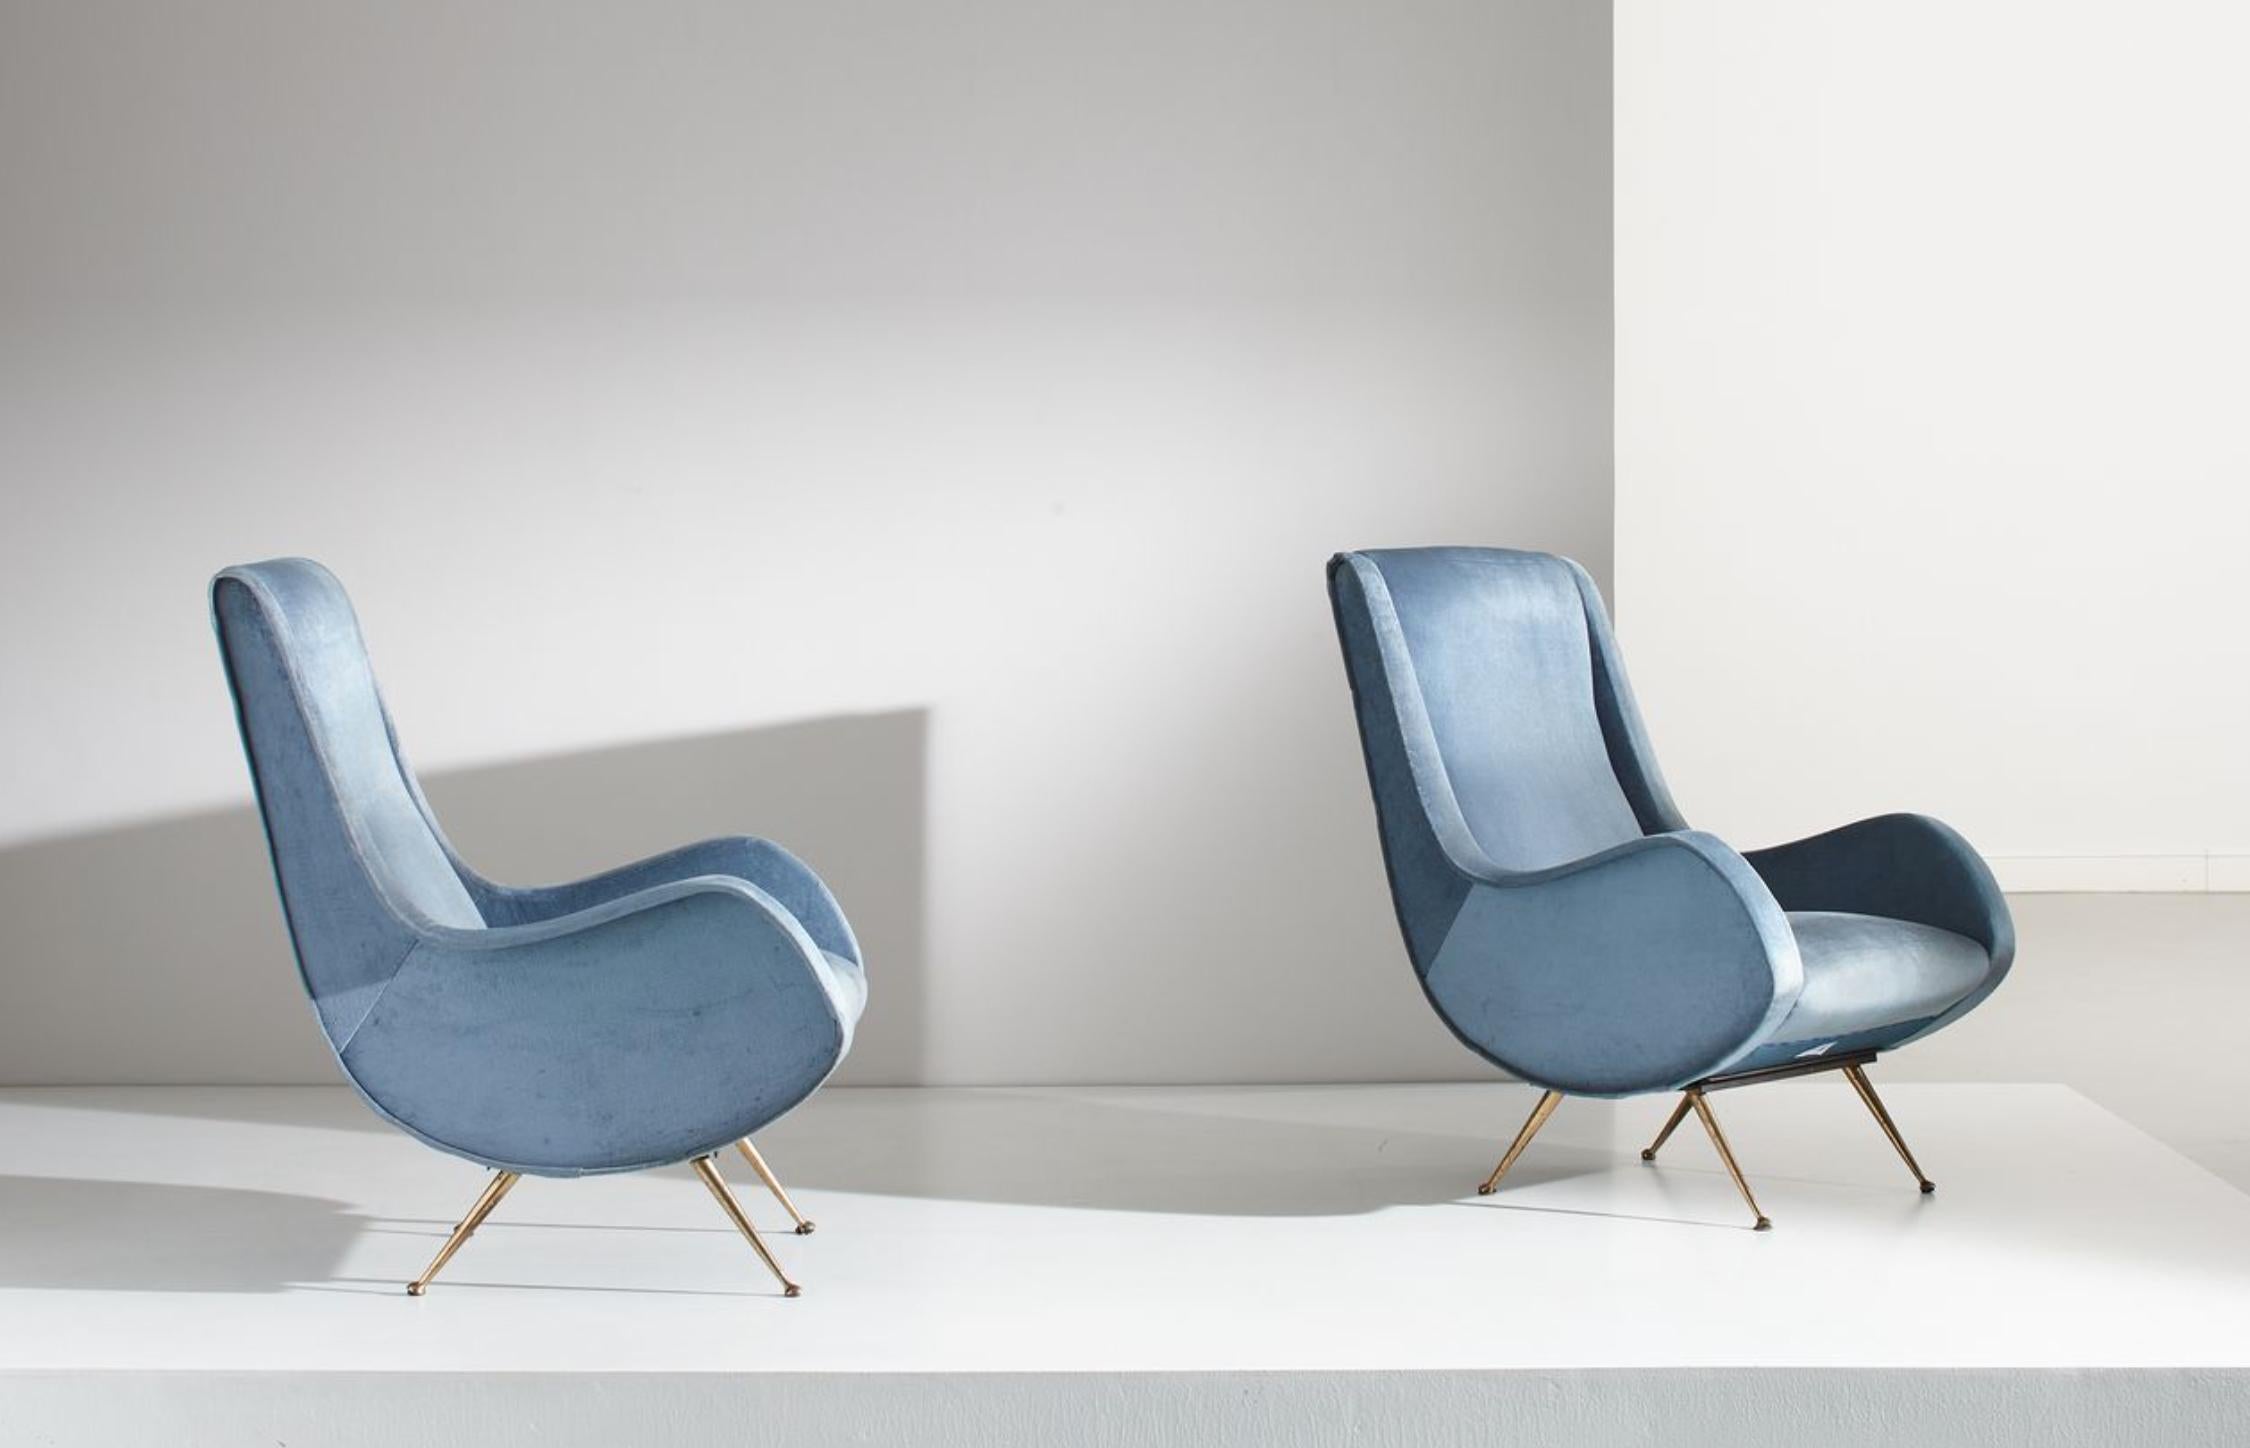 Pair of light blue vintage Italian armchairs by Aldo Morbelli upholstered in velvet.
Very good condition with no restorations.
Italy, circa 1950.